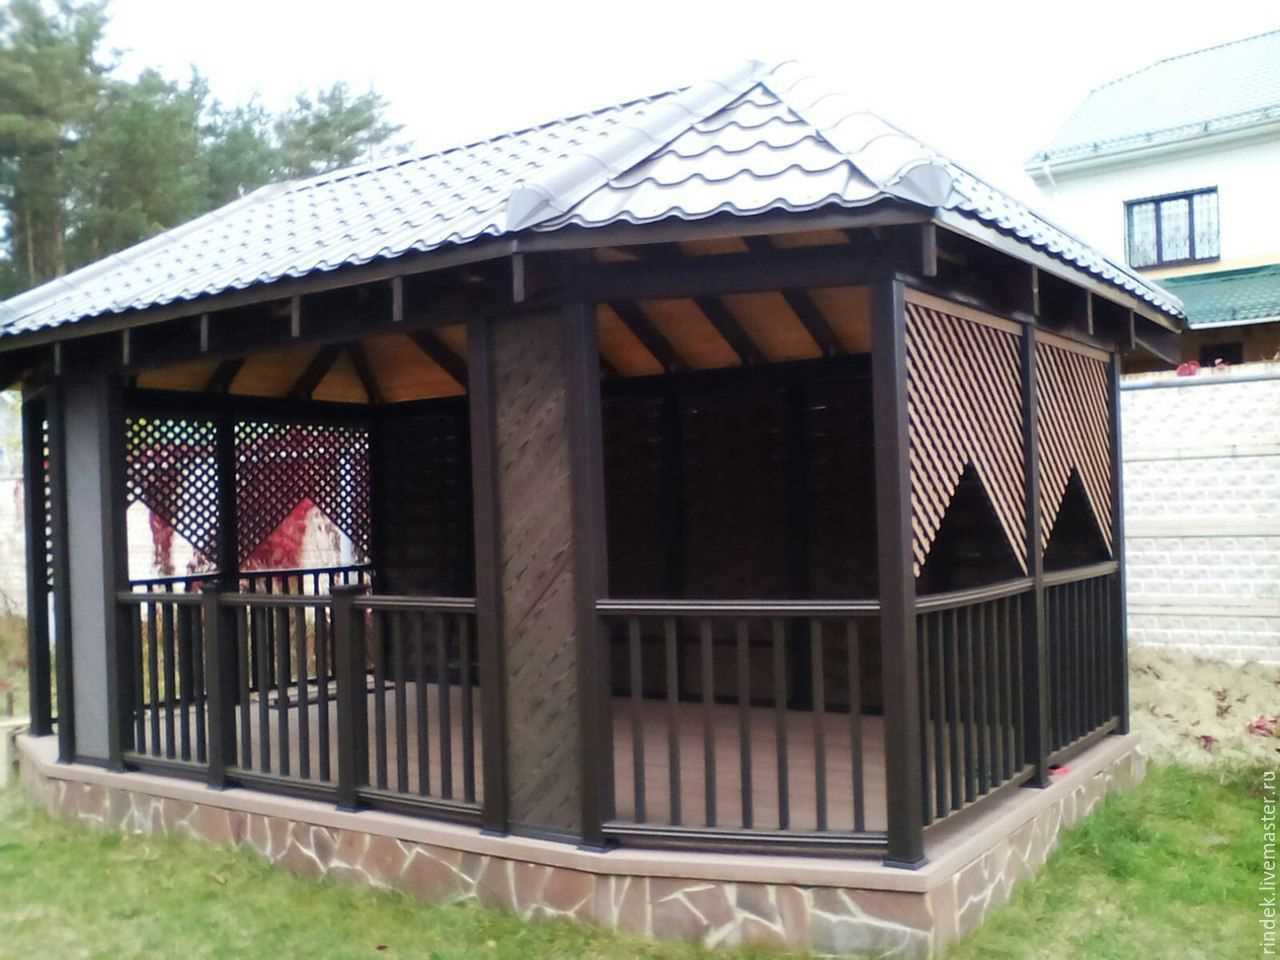 version of the beautiful interior of the gazebo in the yard